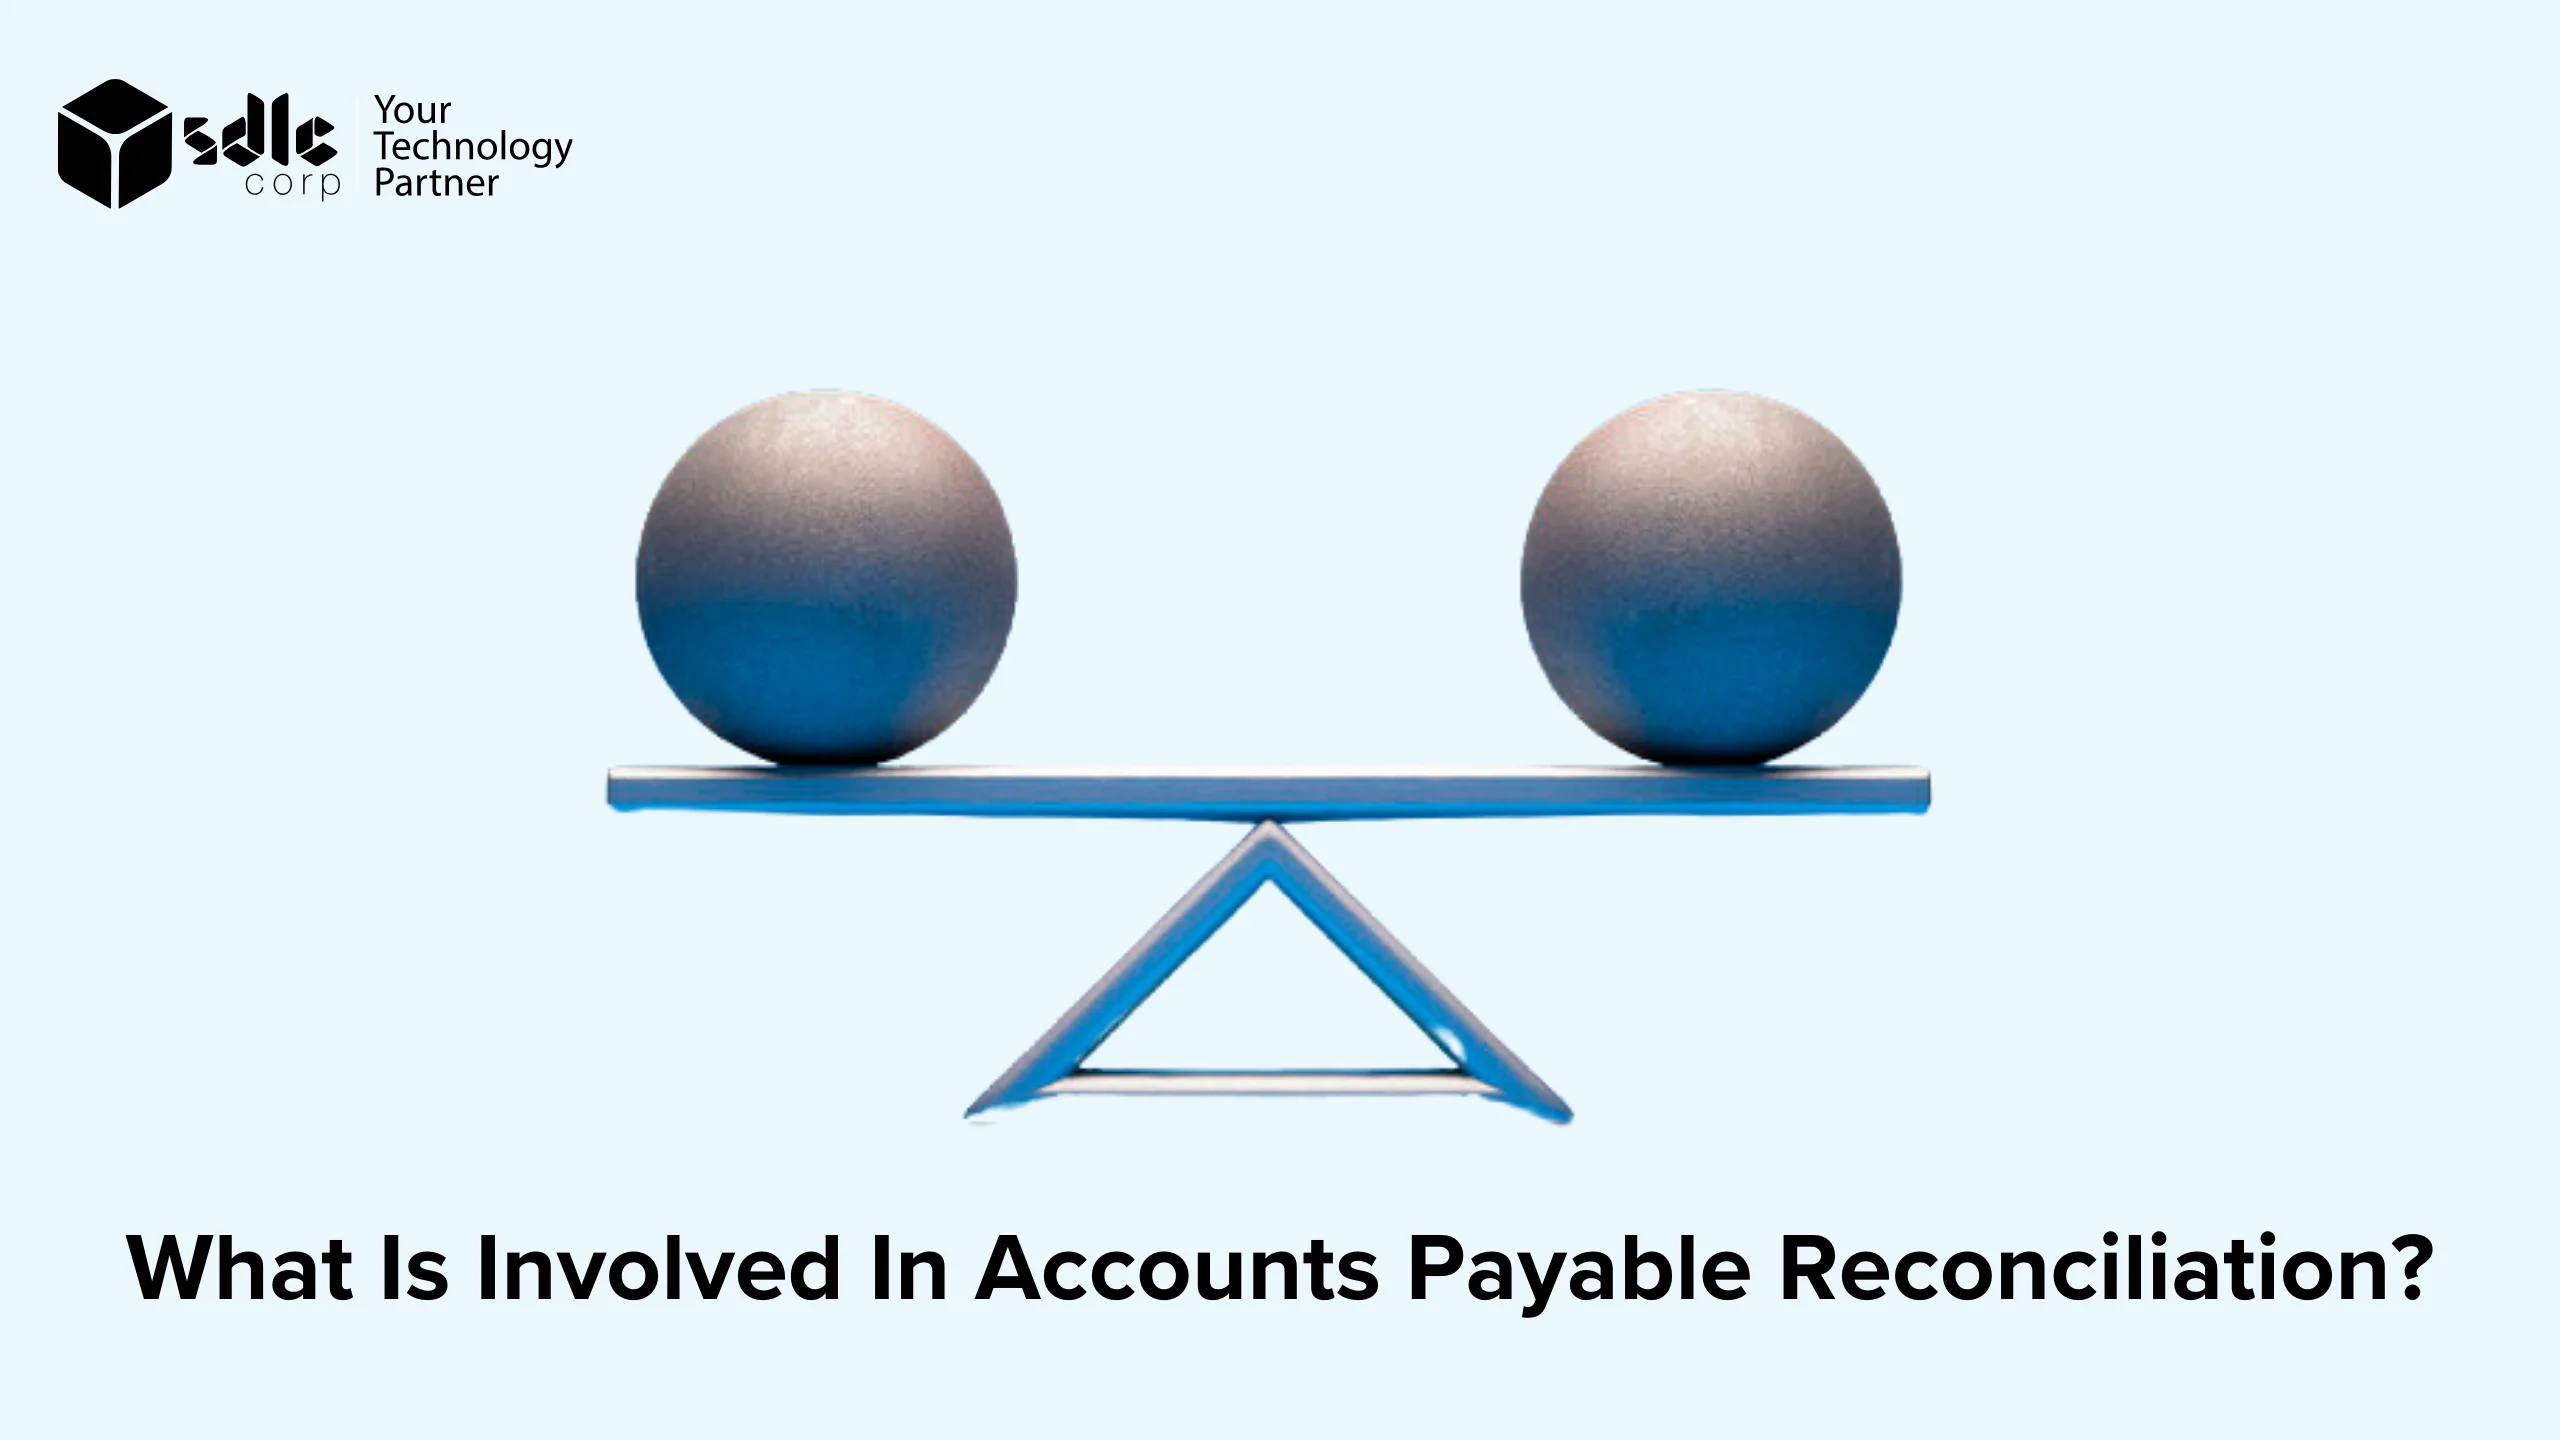 What Is Involved in Accounts Payable Reconciliation